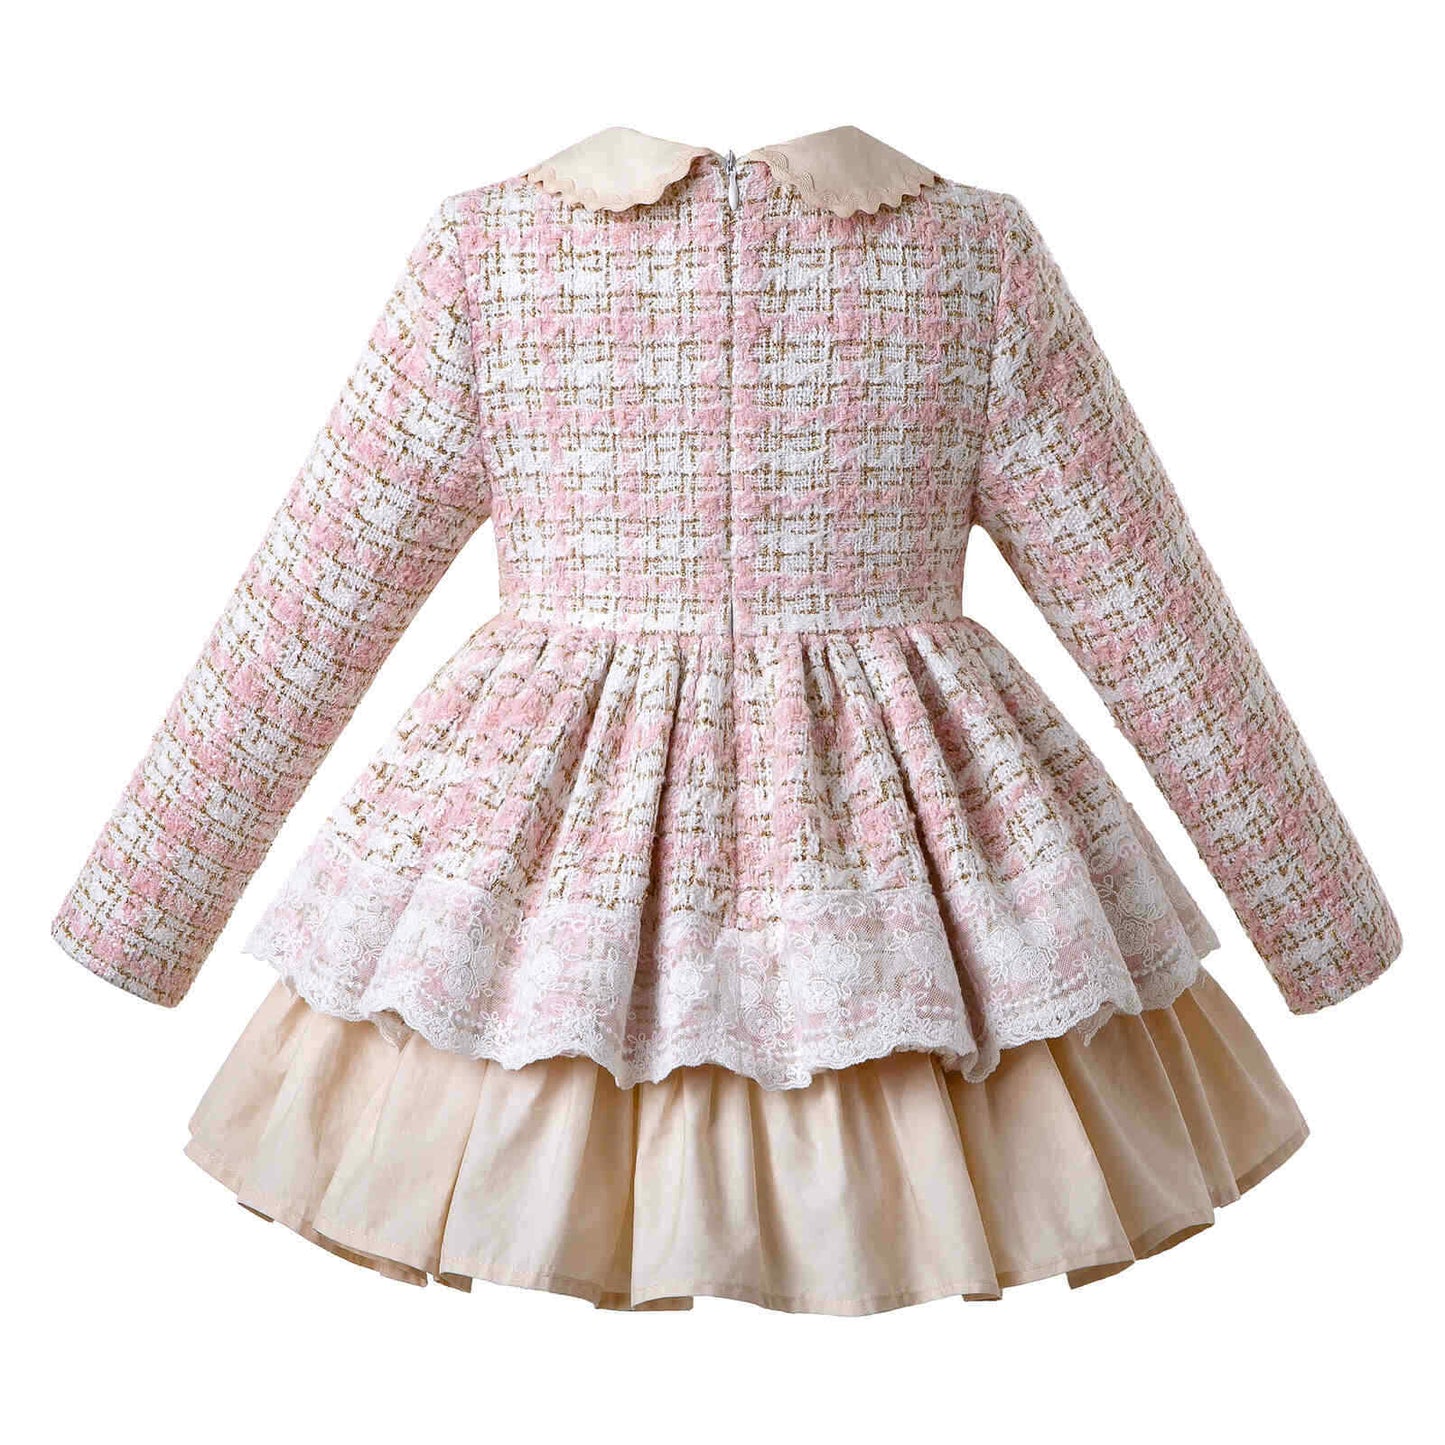 (Authentic Pettigirl) Vintage Girls Lace Dress Tweed Christmas Clothes Spanish Style